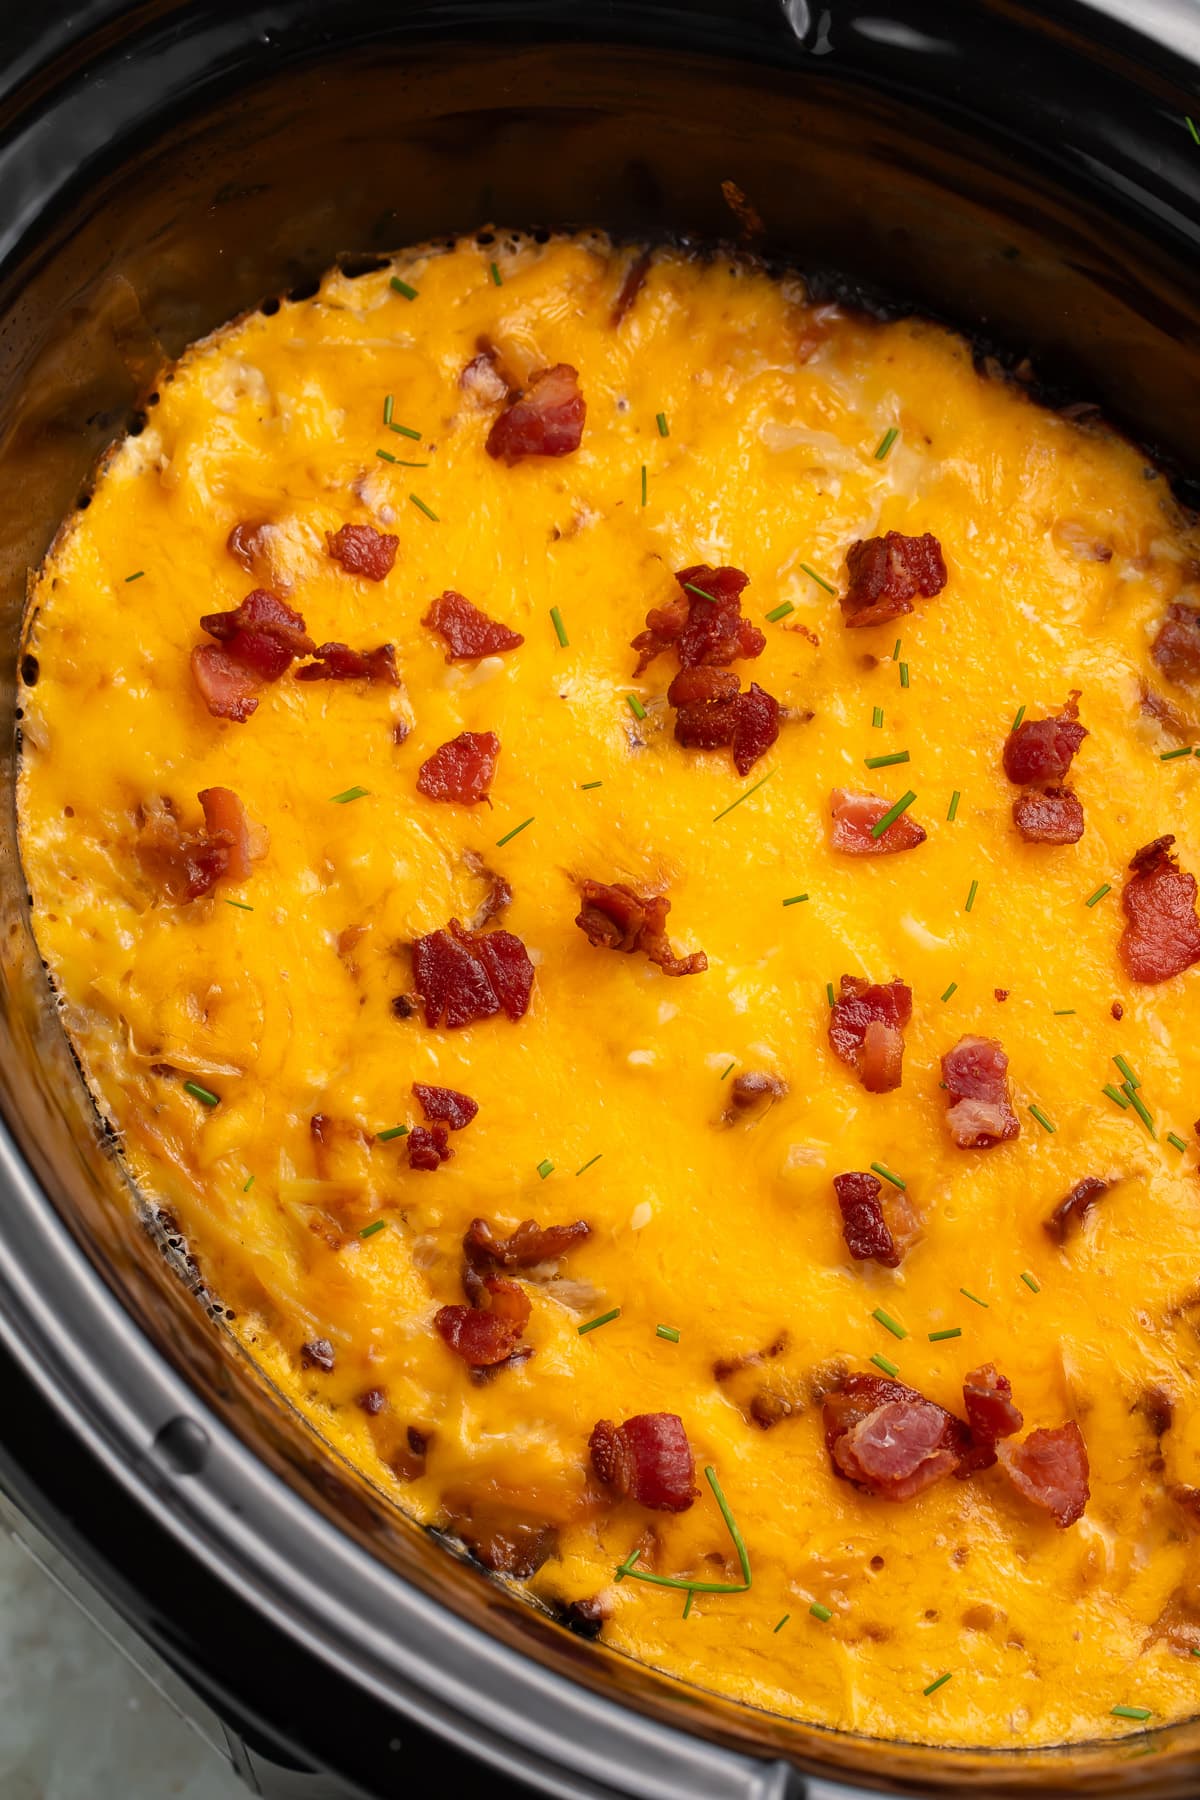 A black Crockpot insert, angled up toward the left of the photo, holding a breakfast casserole topped with melted cheddar and pieces of bacon.